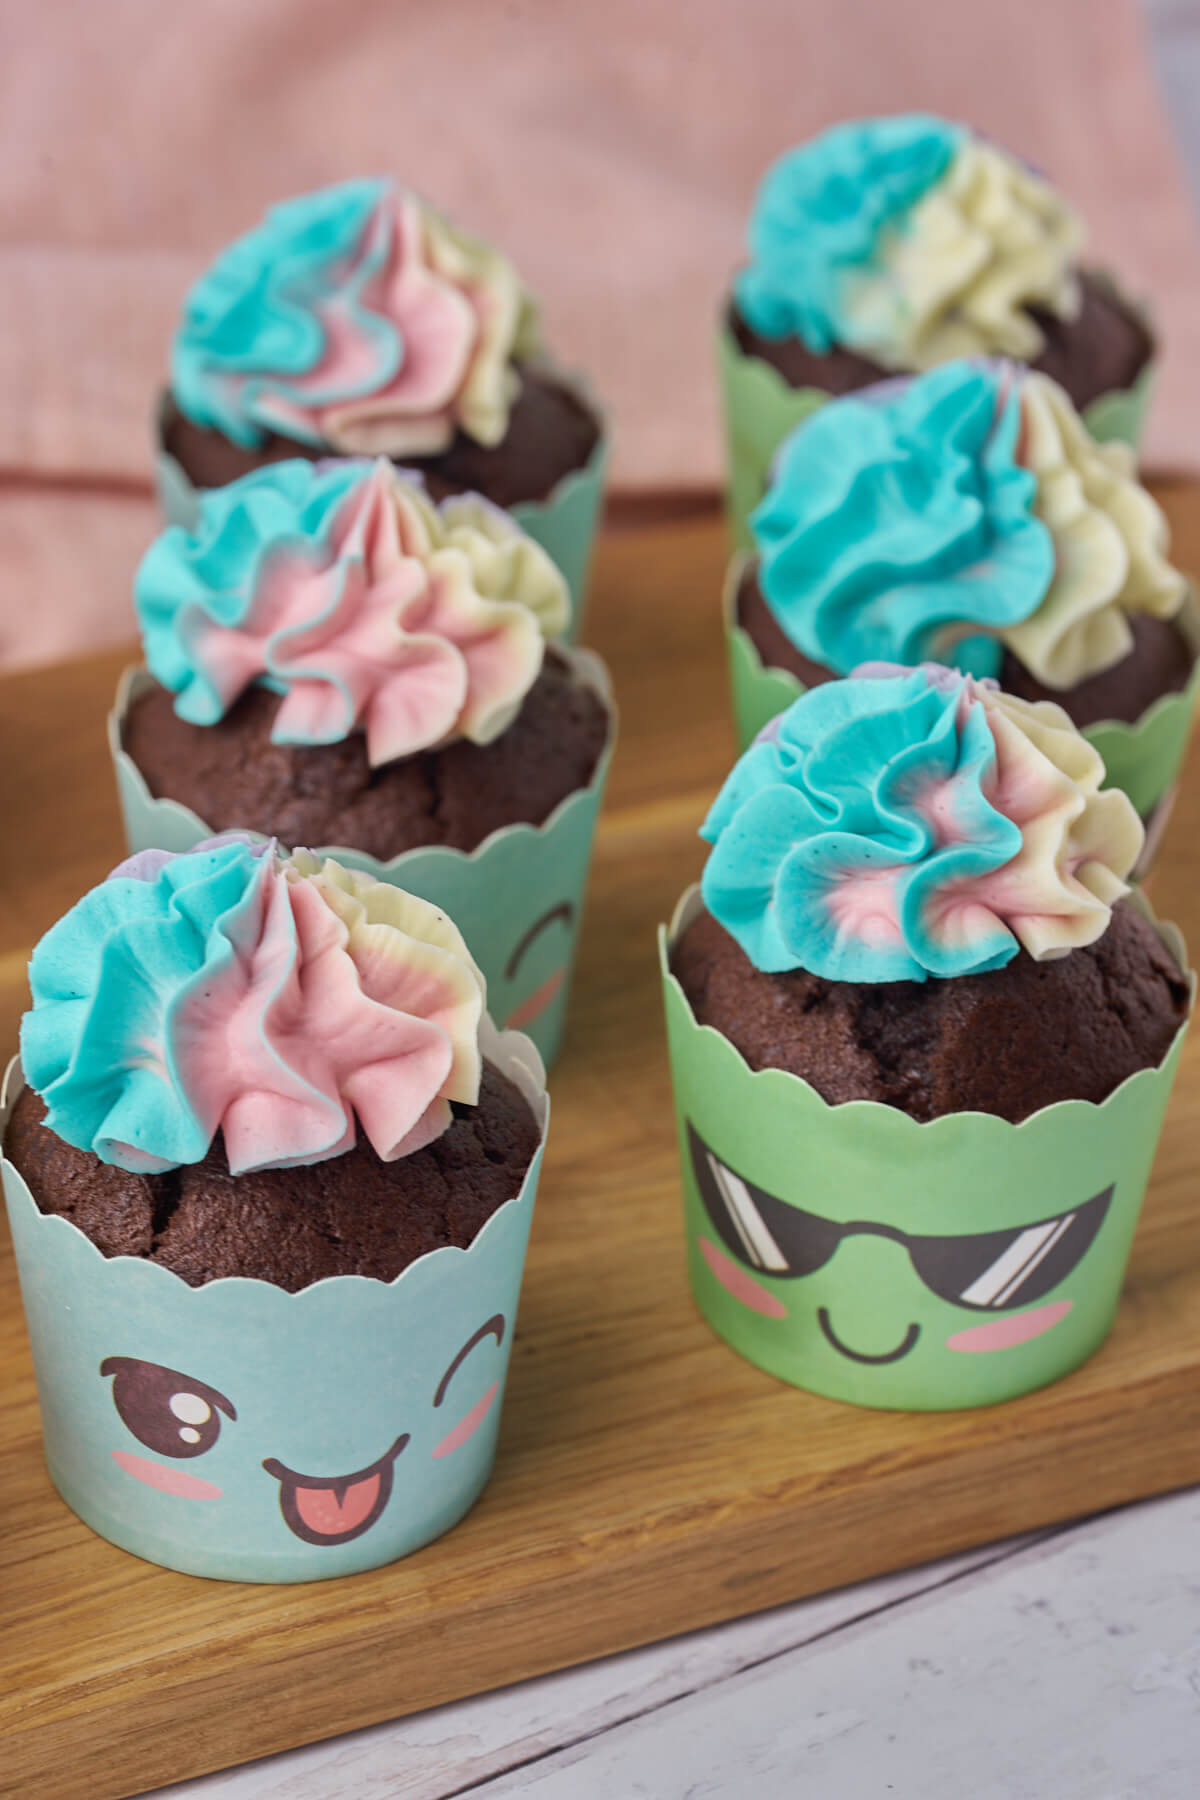 funny cupcakes with faces made of chocolate banana muffins with multicolored buttercream